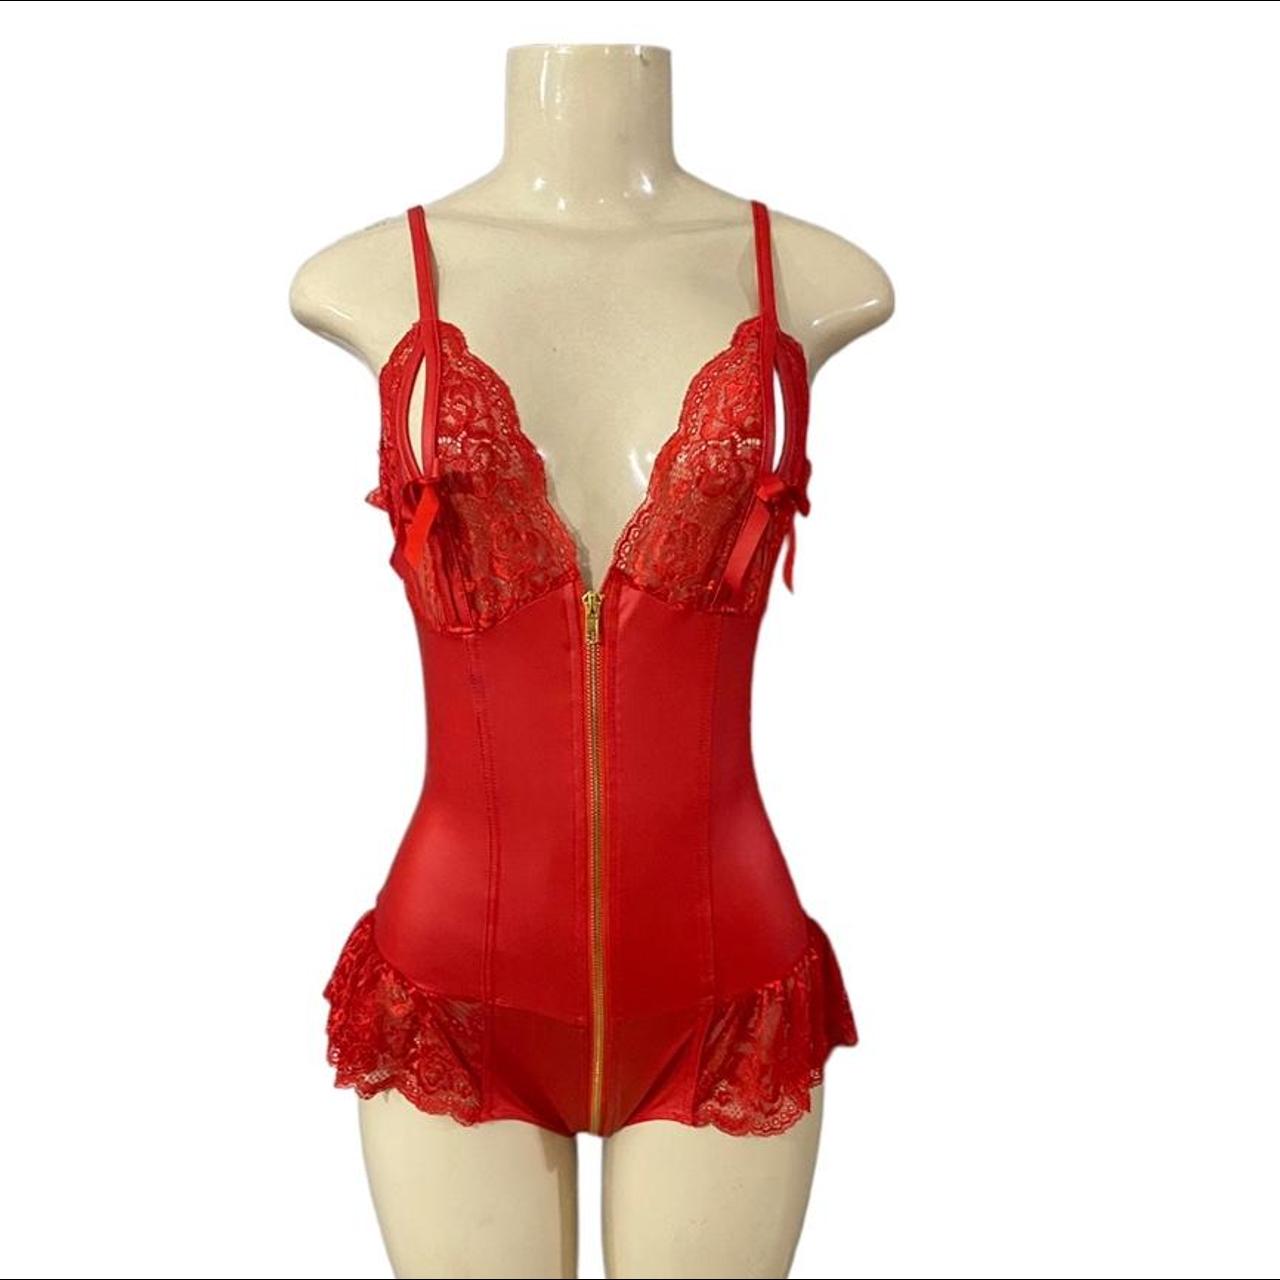 Product Image 1 - Red lingerie bodysuit 
Never worn